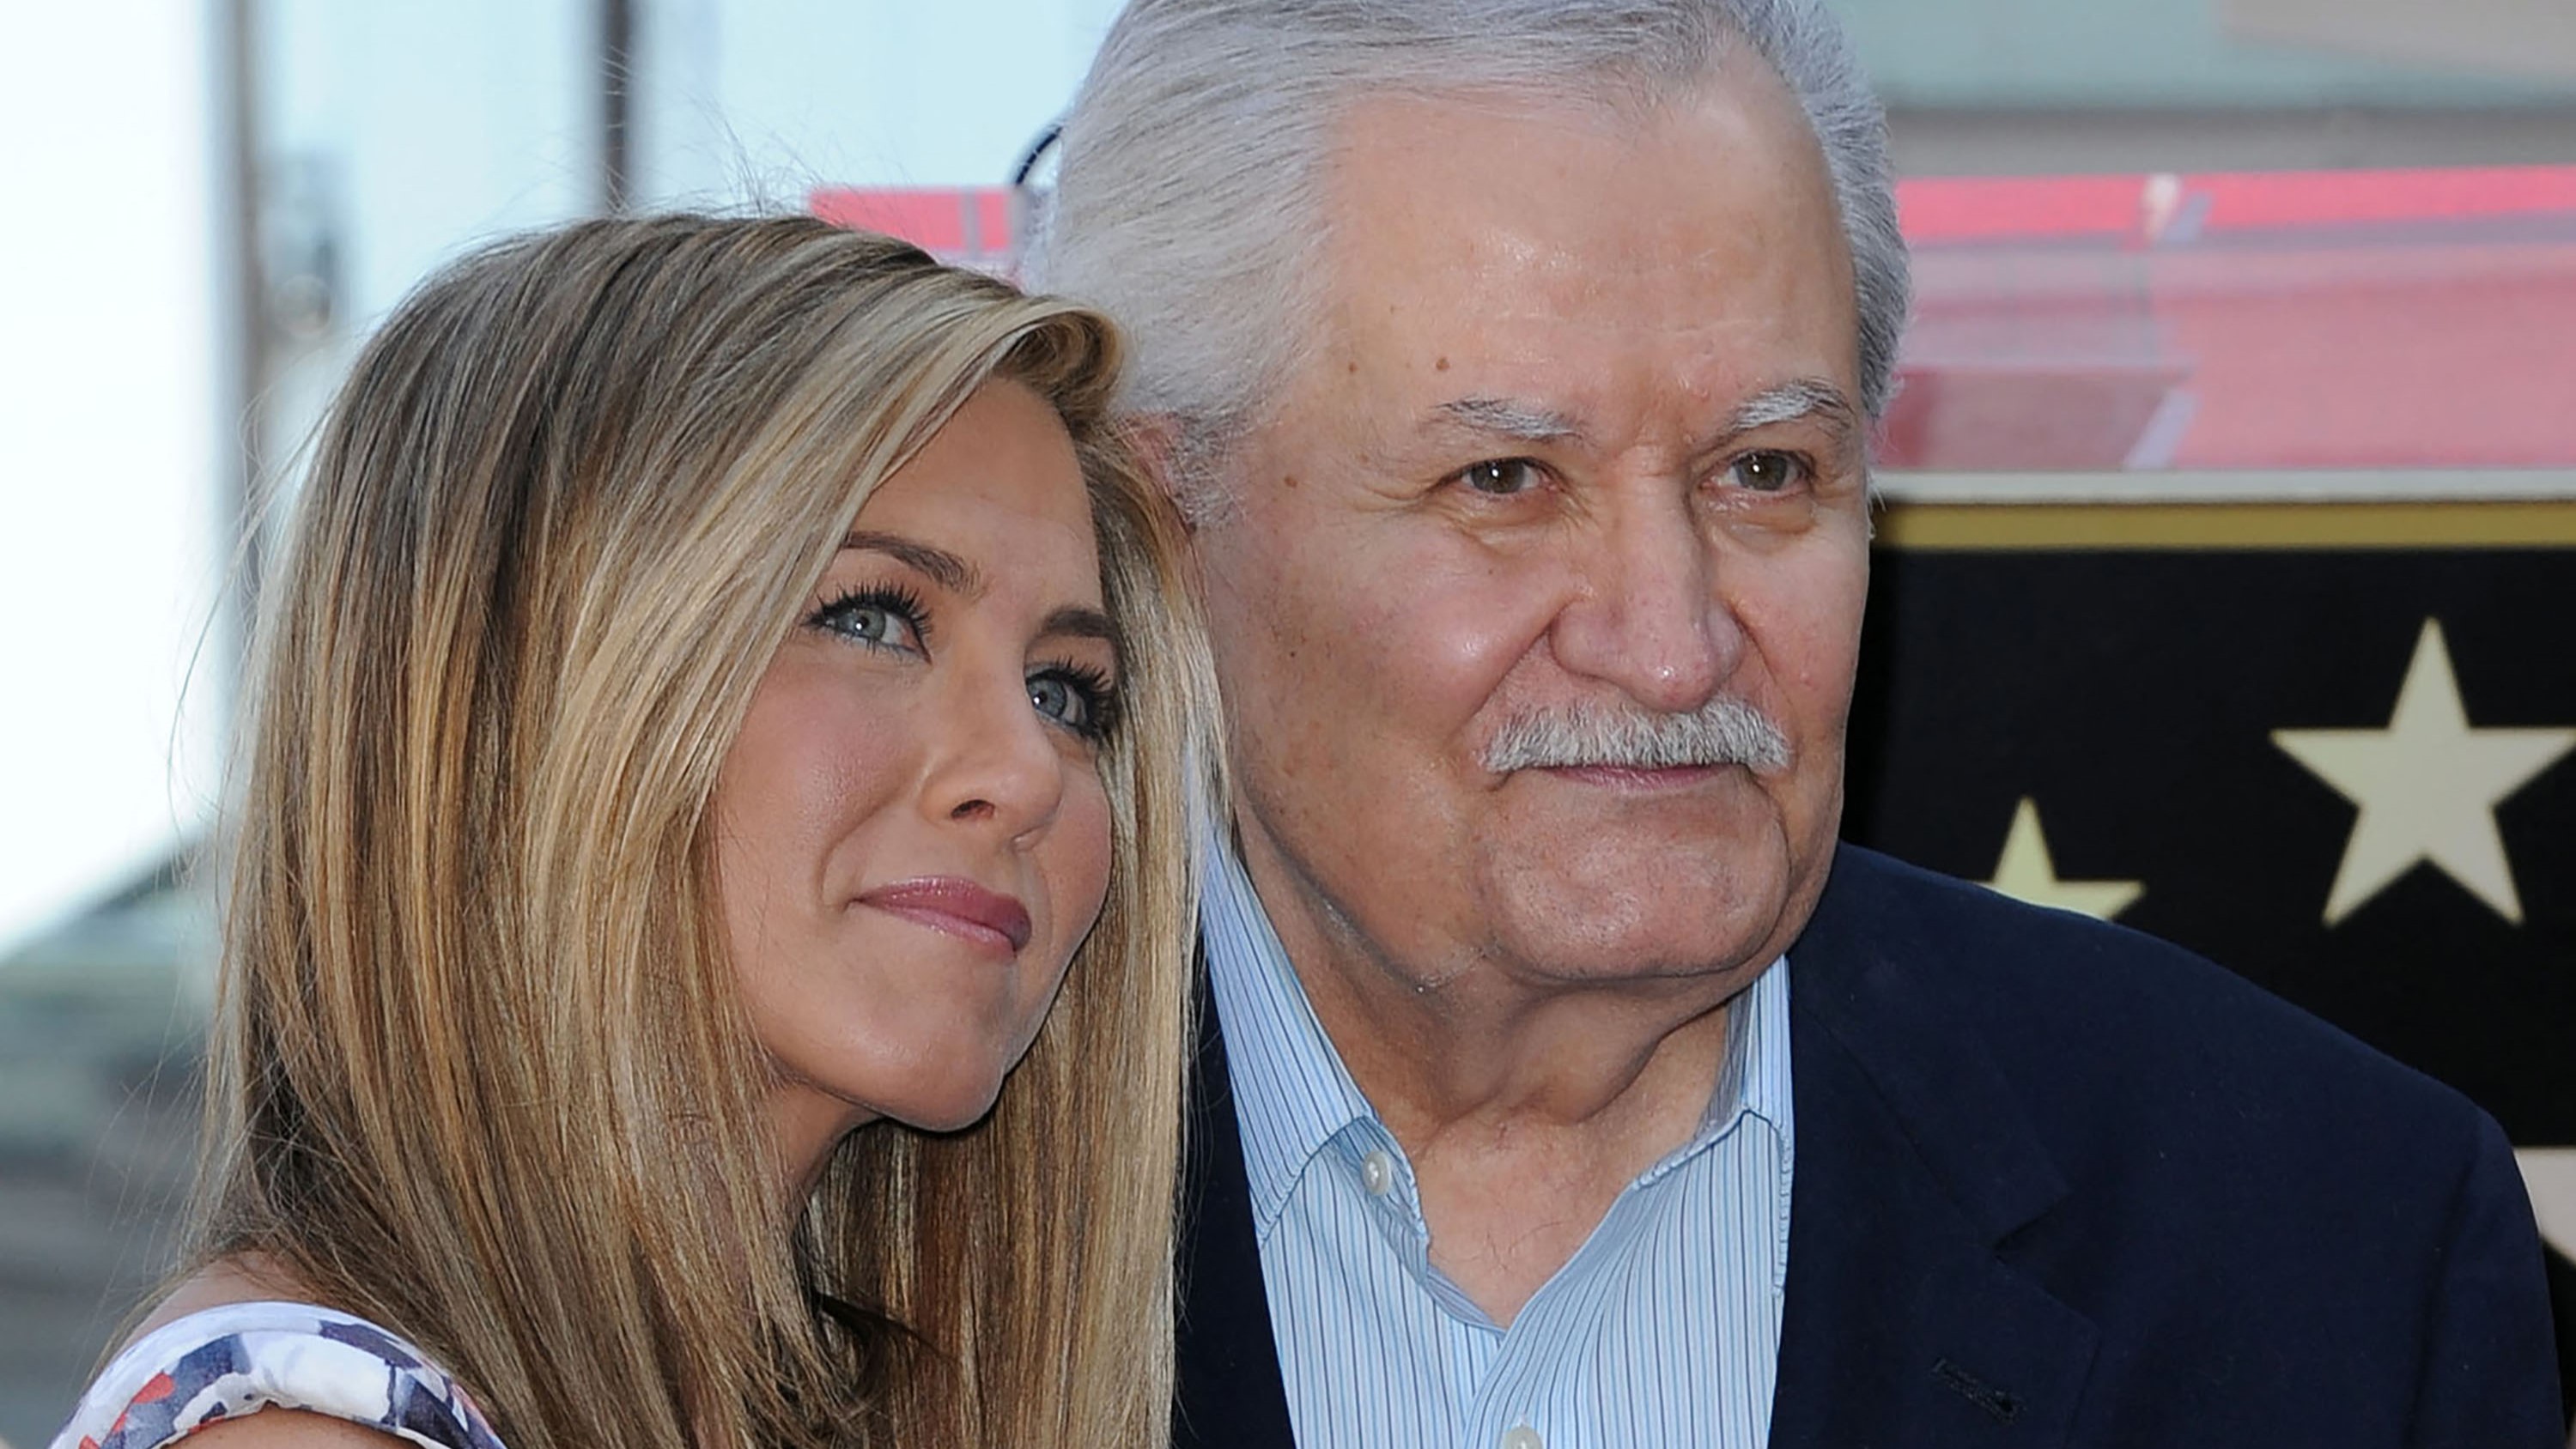  Jennifer Aniston reveals her father, 'Days of Our Lives' actor John Anthony Aniston, has passed away 